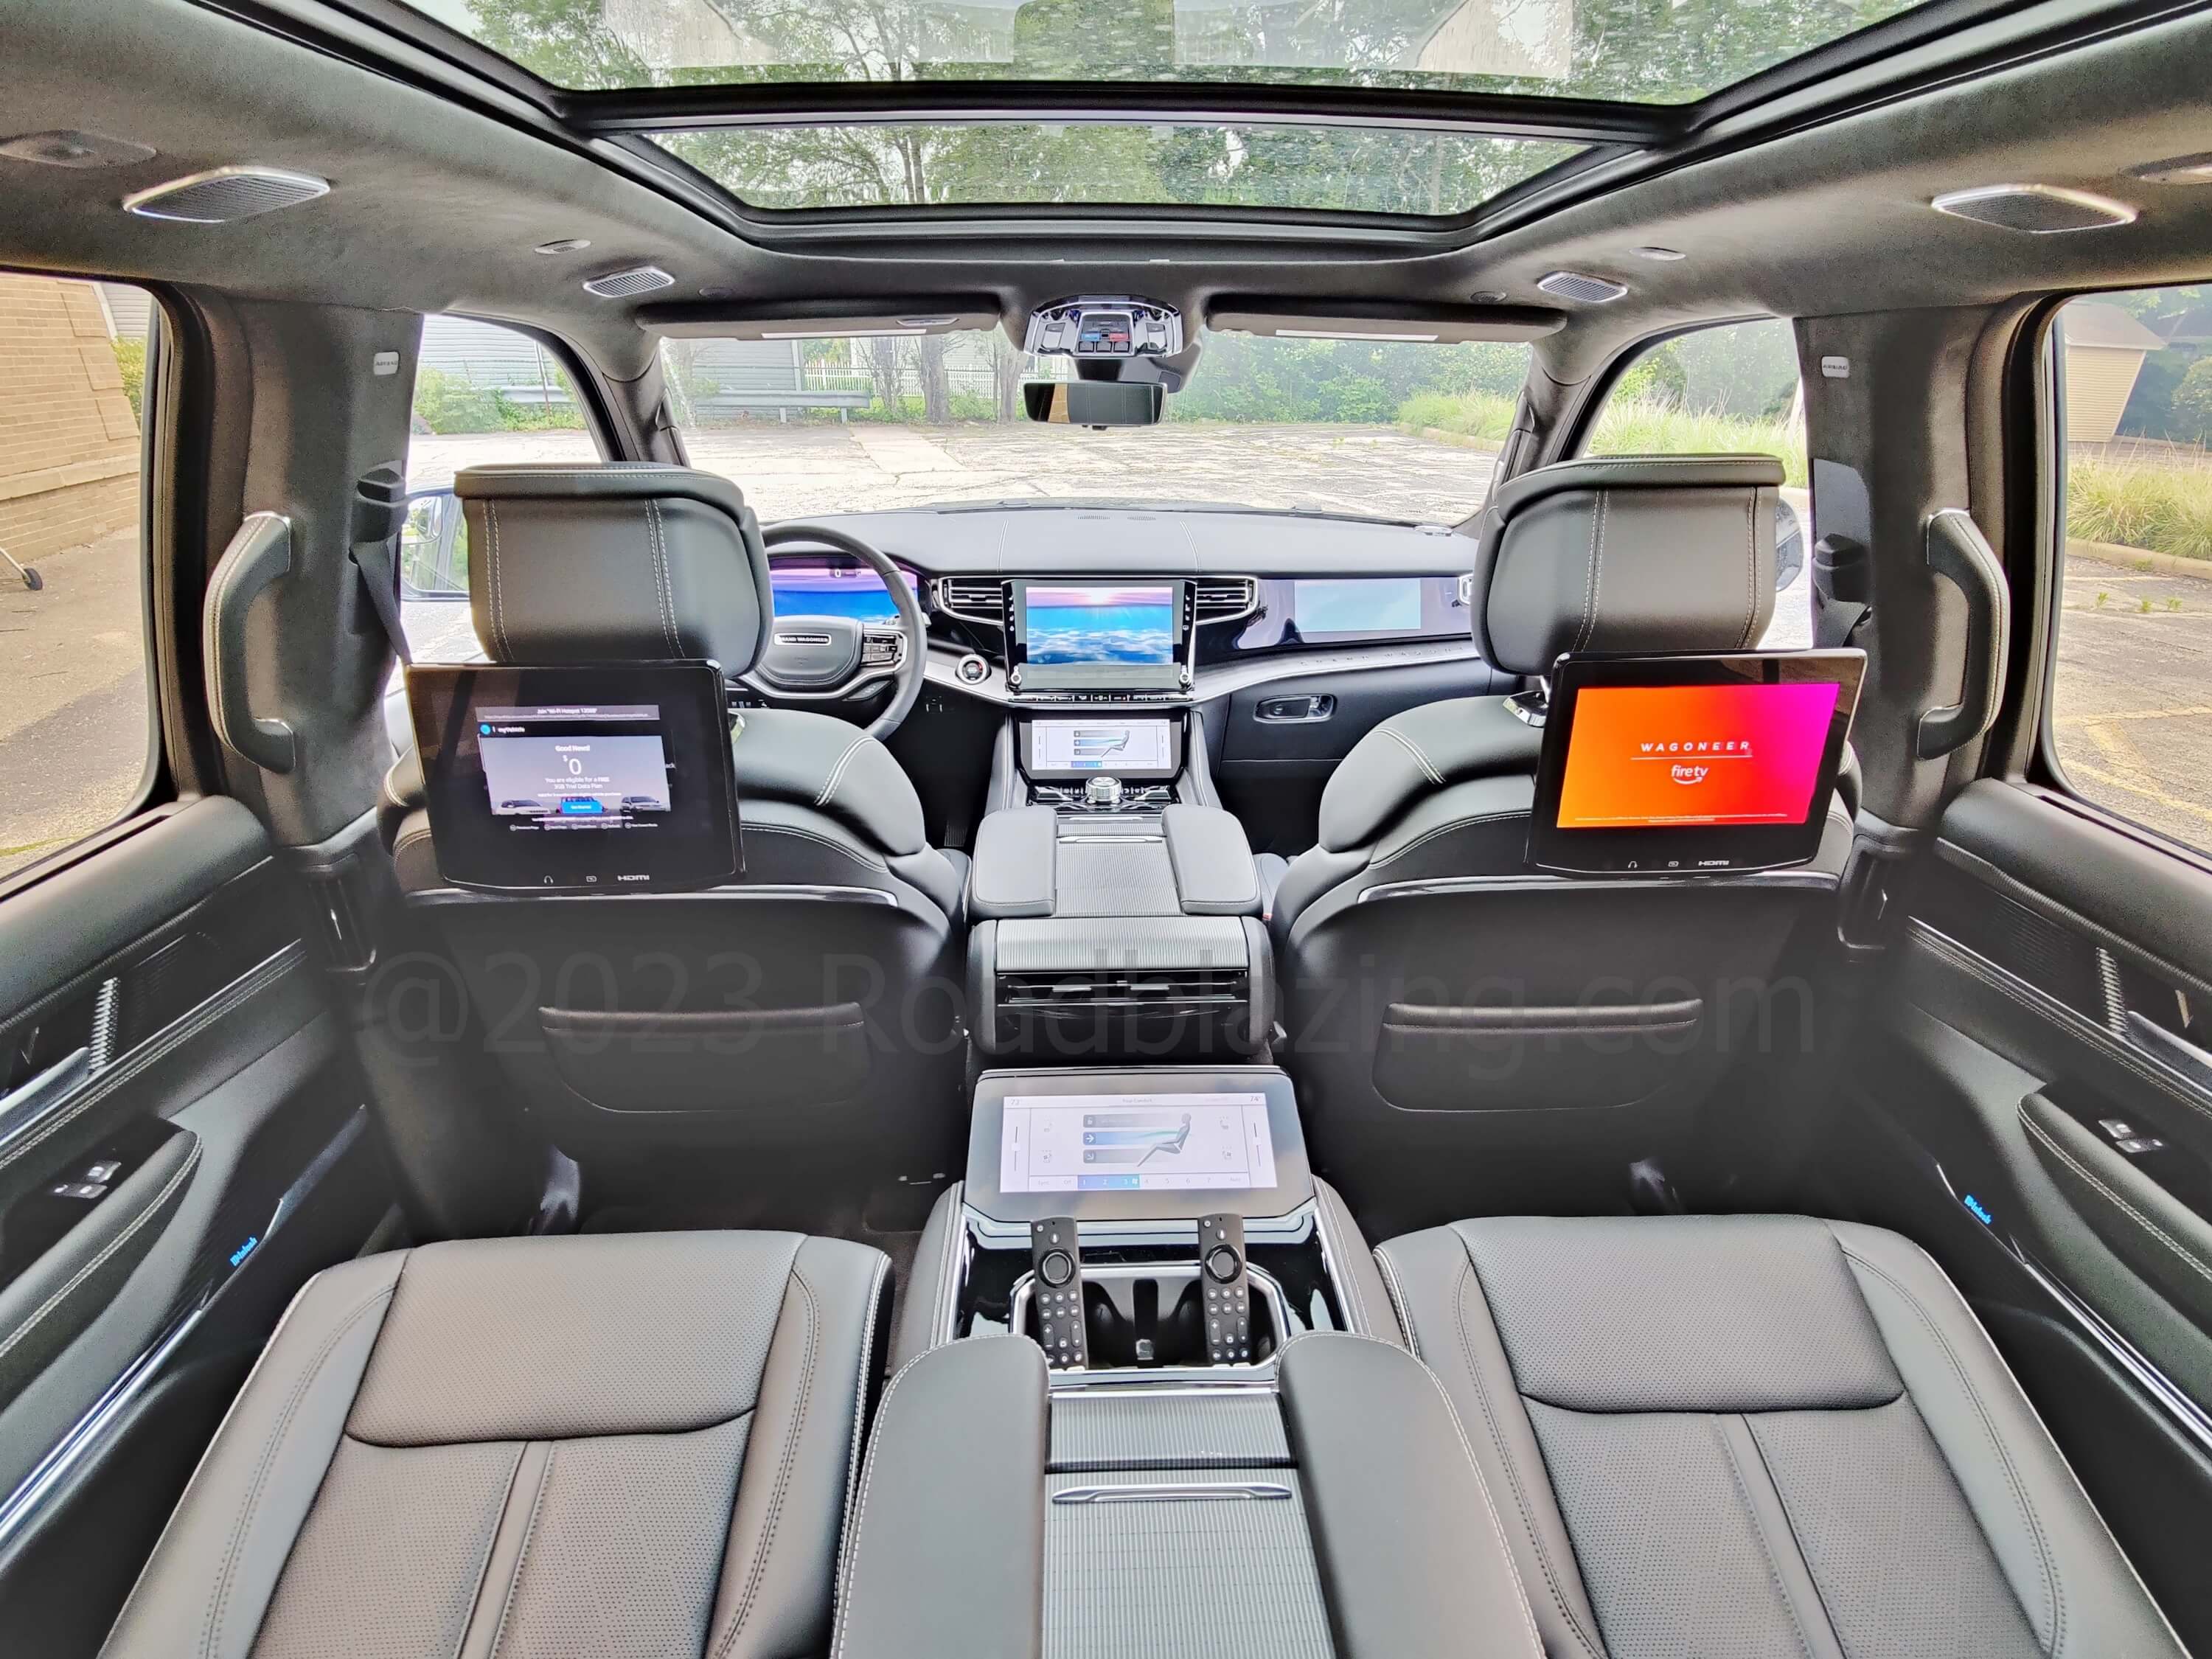 2022 Jeep Grand Wagoneer 6.4L Obsidian 4x4: cabin view forward from Row 2